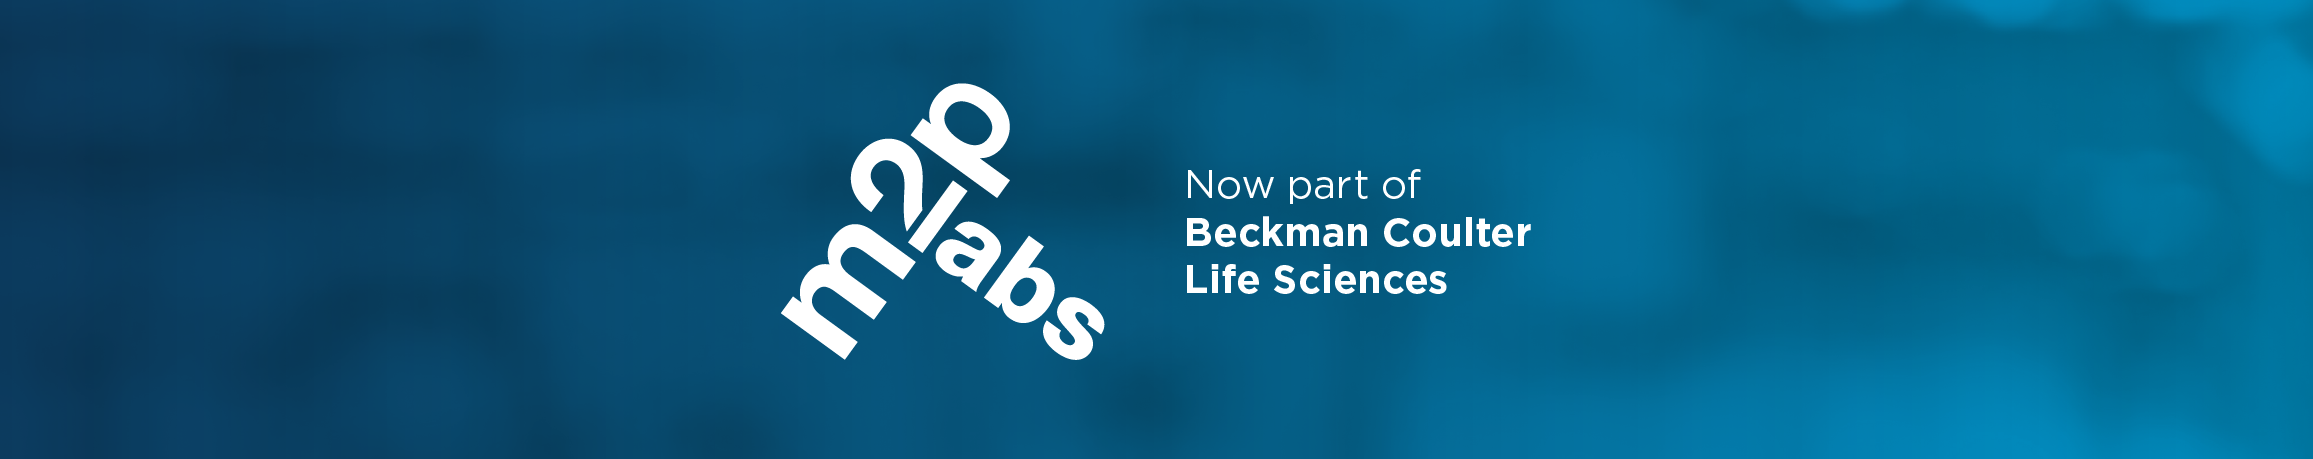 M2P Labs now part of Beckman Coulter Life Sciences Banner